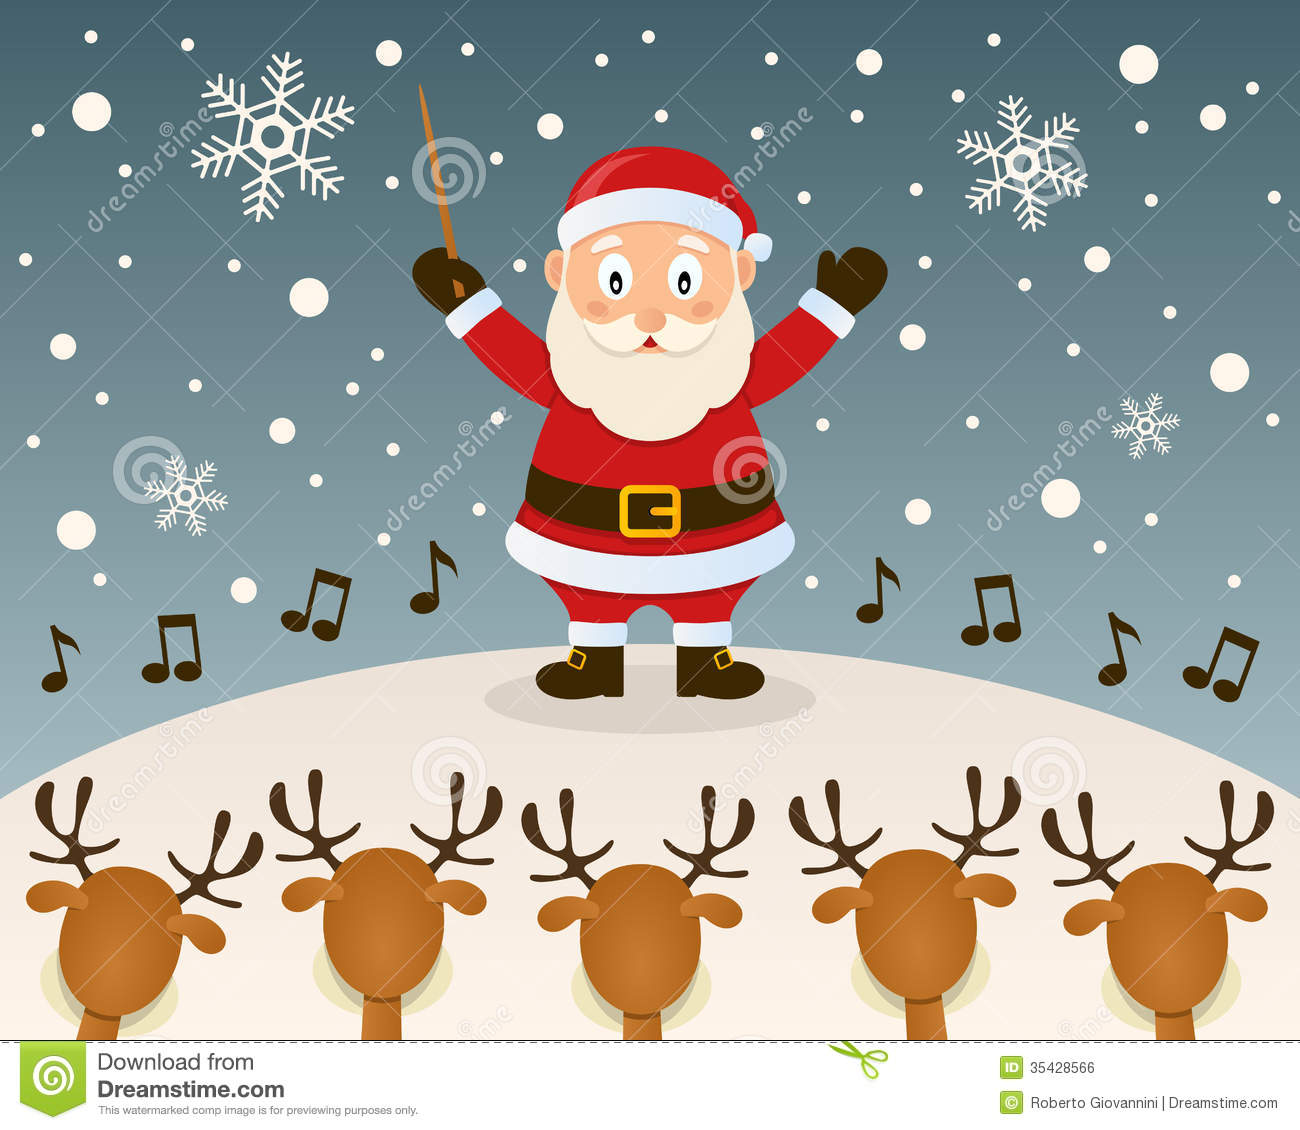 Five Reindeer Singing Carols In A Snowy Scene  Eps File Available